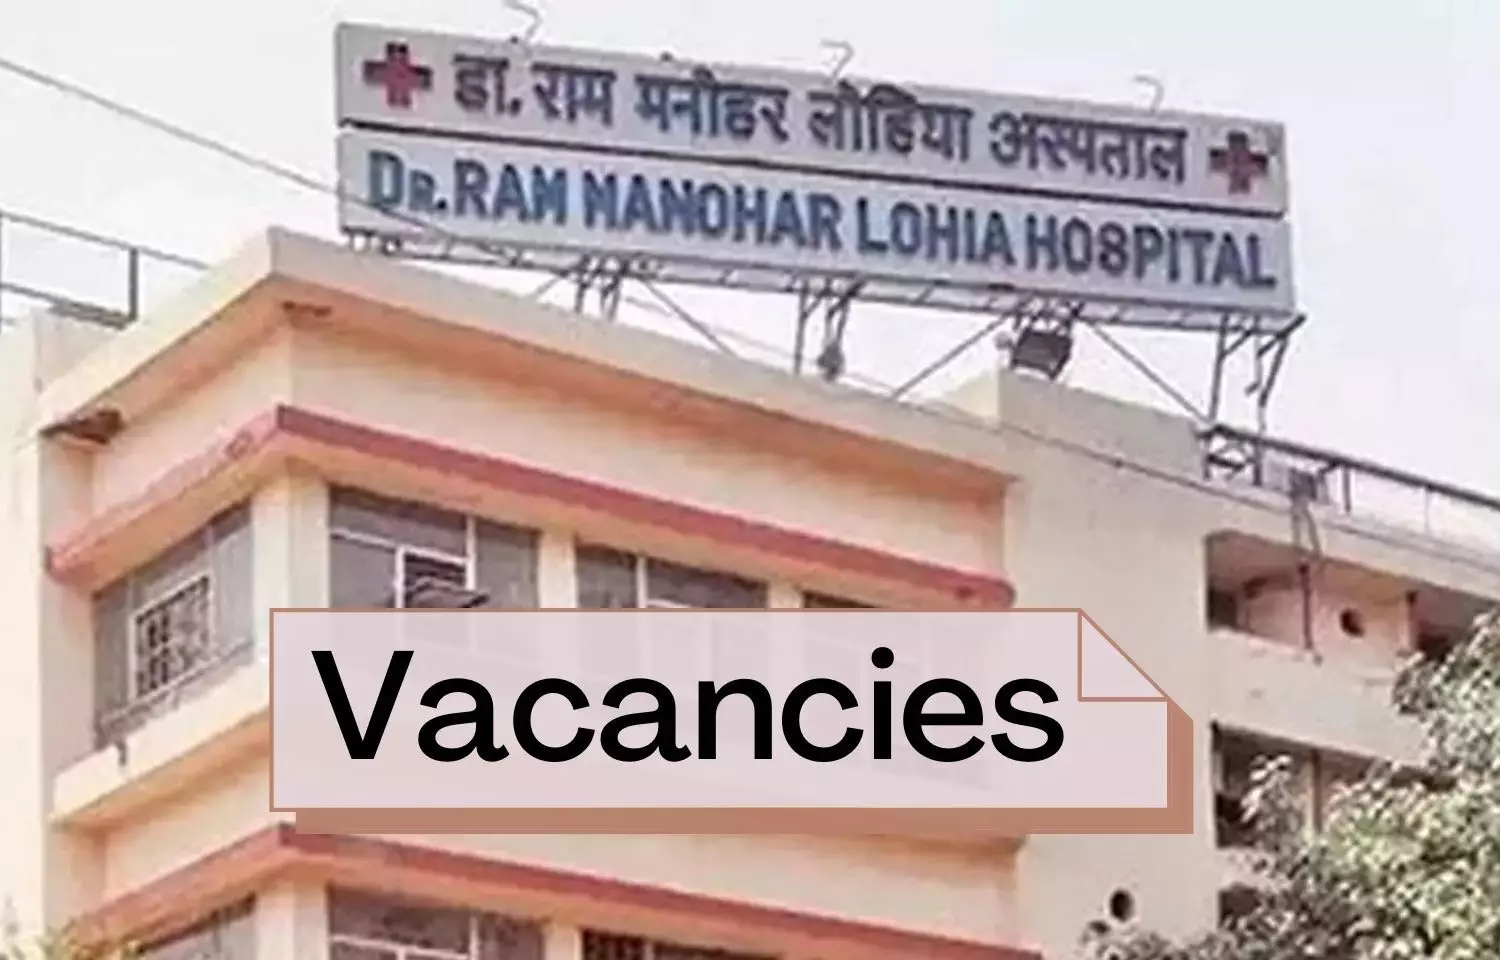 Walk In Interview At RML Hospital Delhi: 44 Vacancies For Senior Resident Post, Check All Details Here